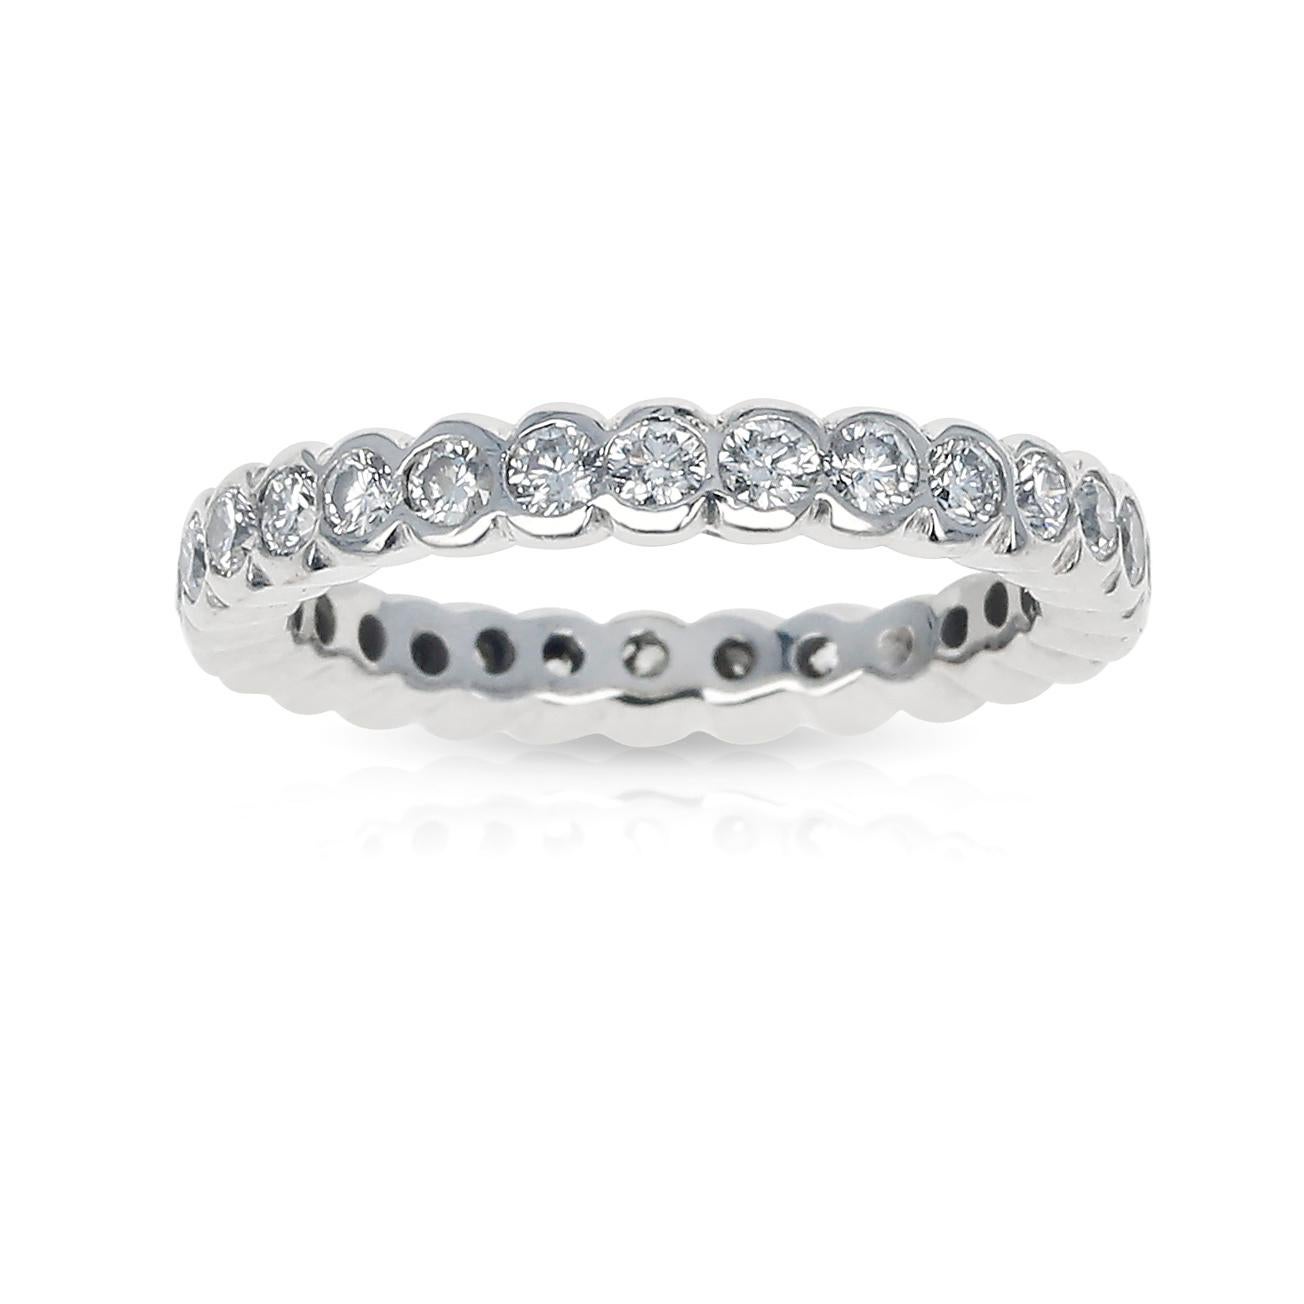 A Graff Diamond Eternity Band with 0.84 carats of Diamonds. Total Weight: 3.58 grams. Ring Size US 4.75. GRAFF 14926. 